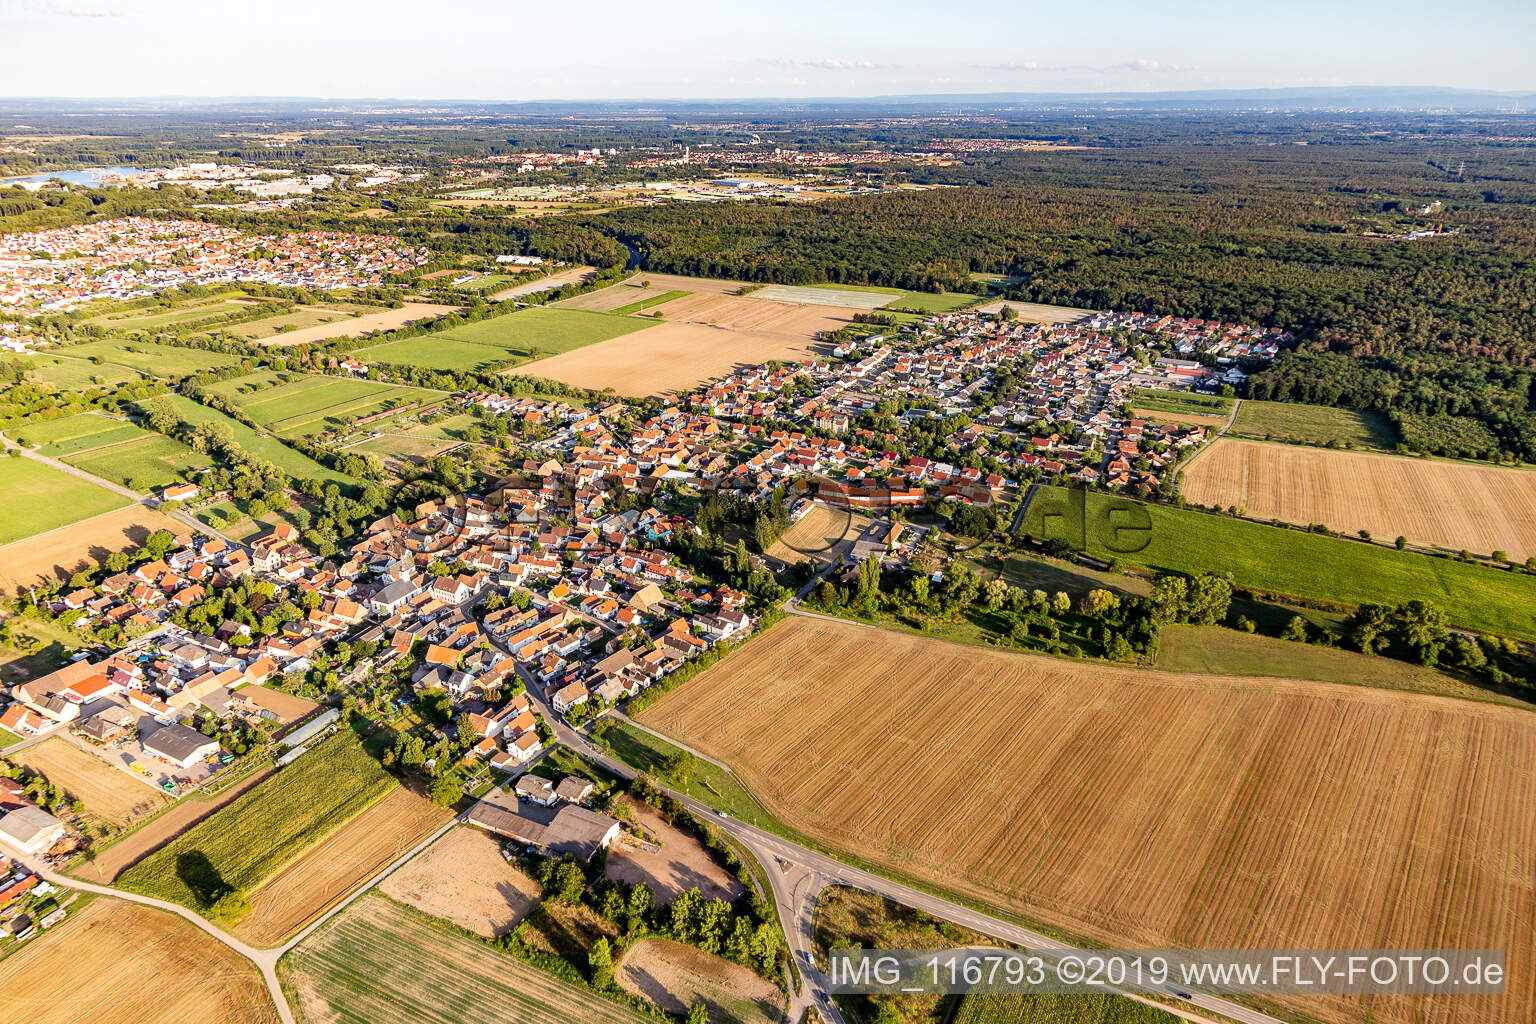 Westheim in the state Rhineland-Palatinate, Germany seen from above